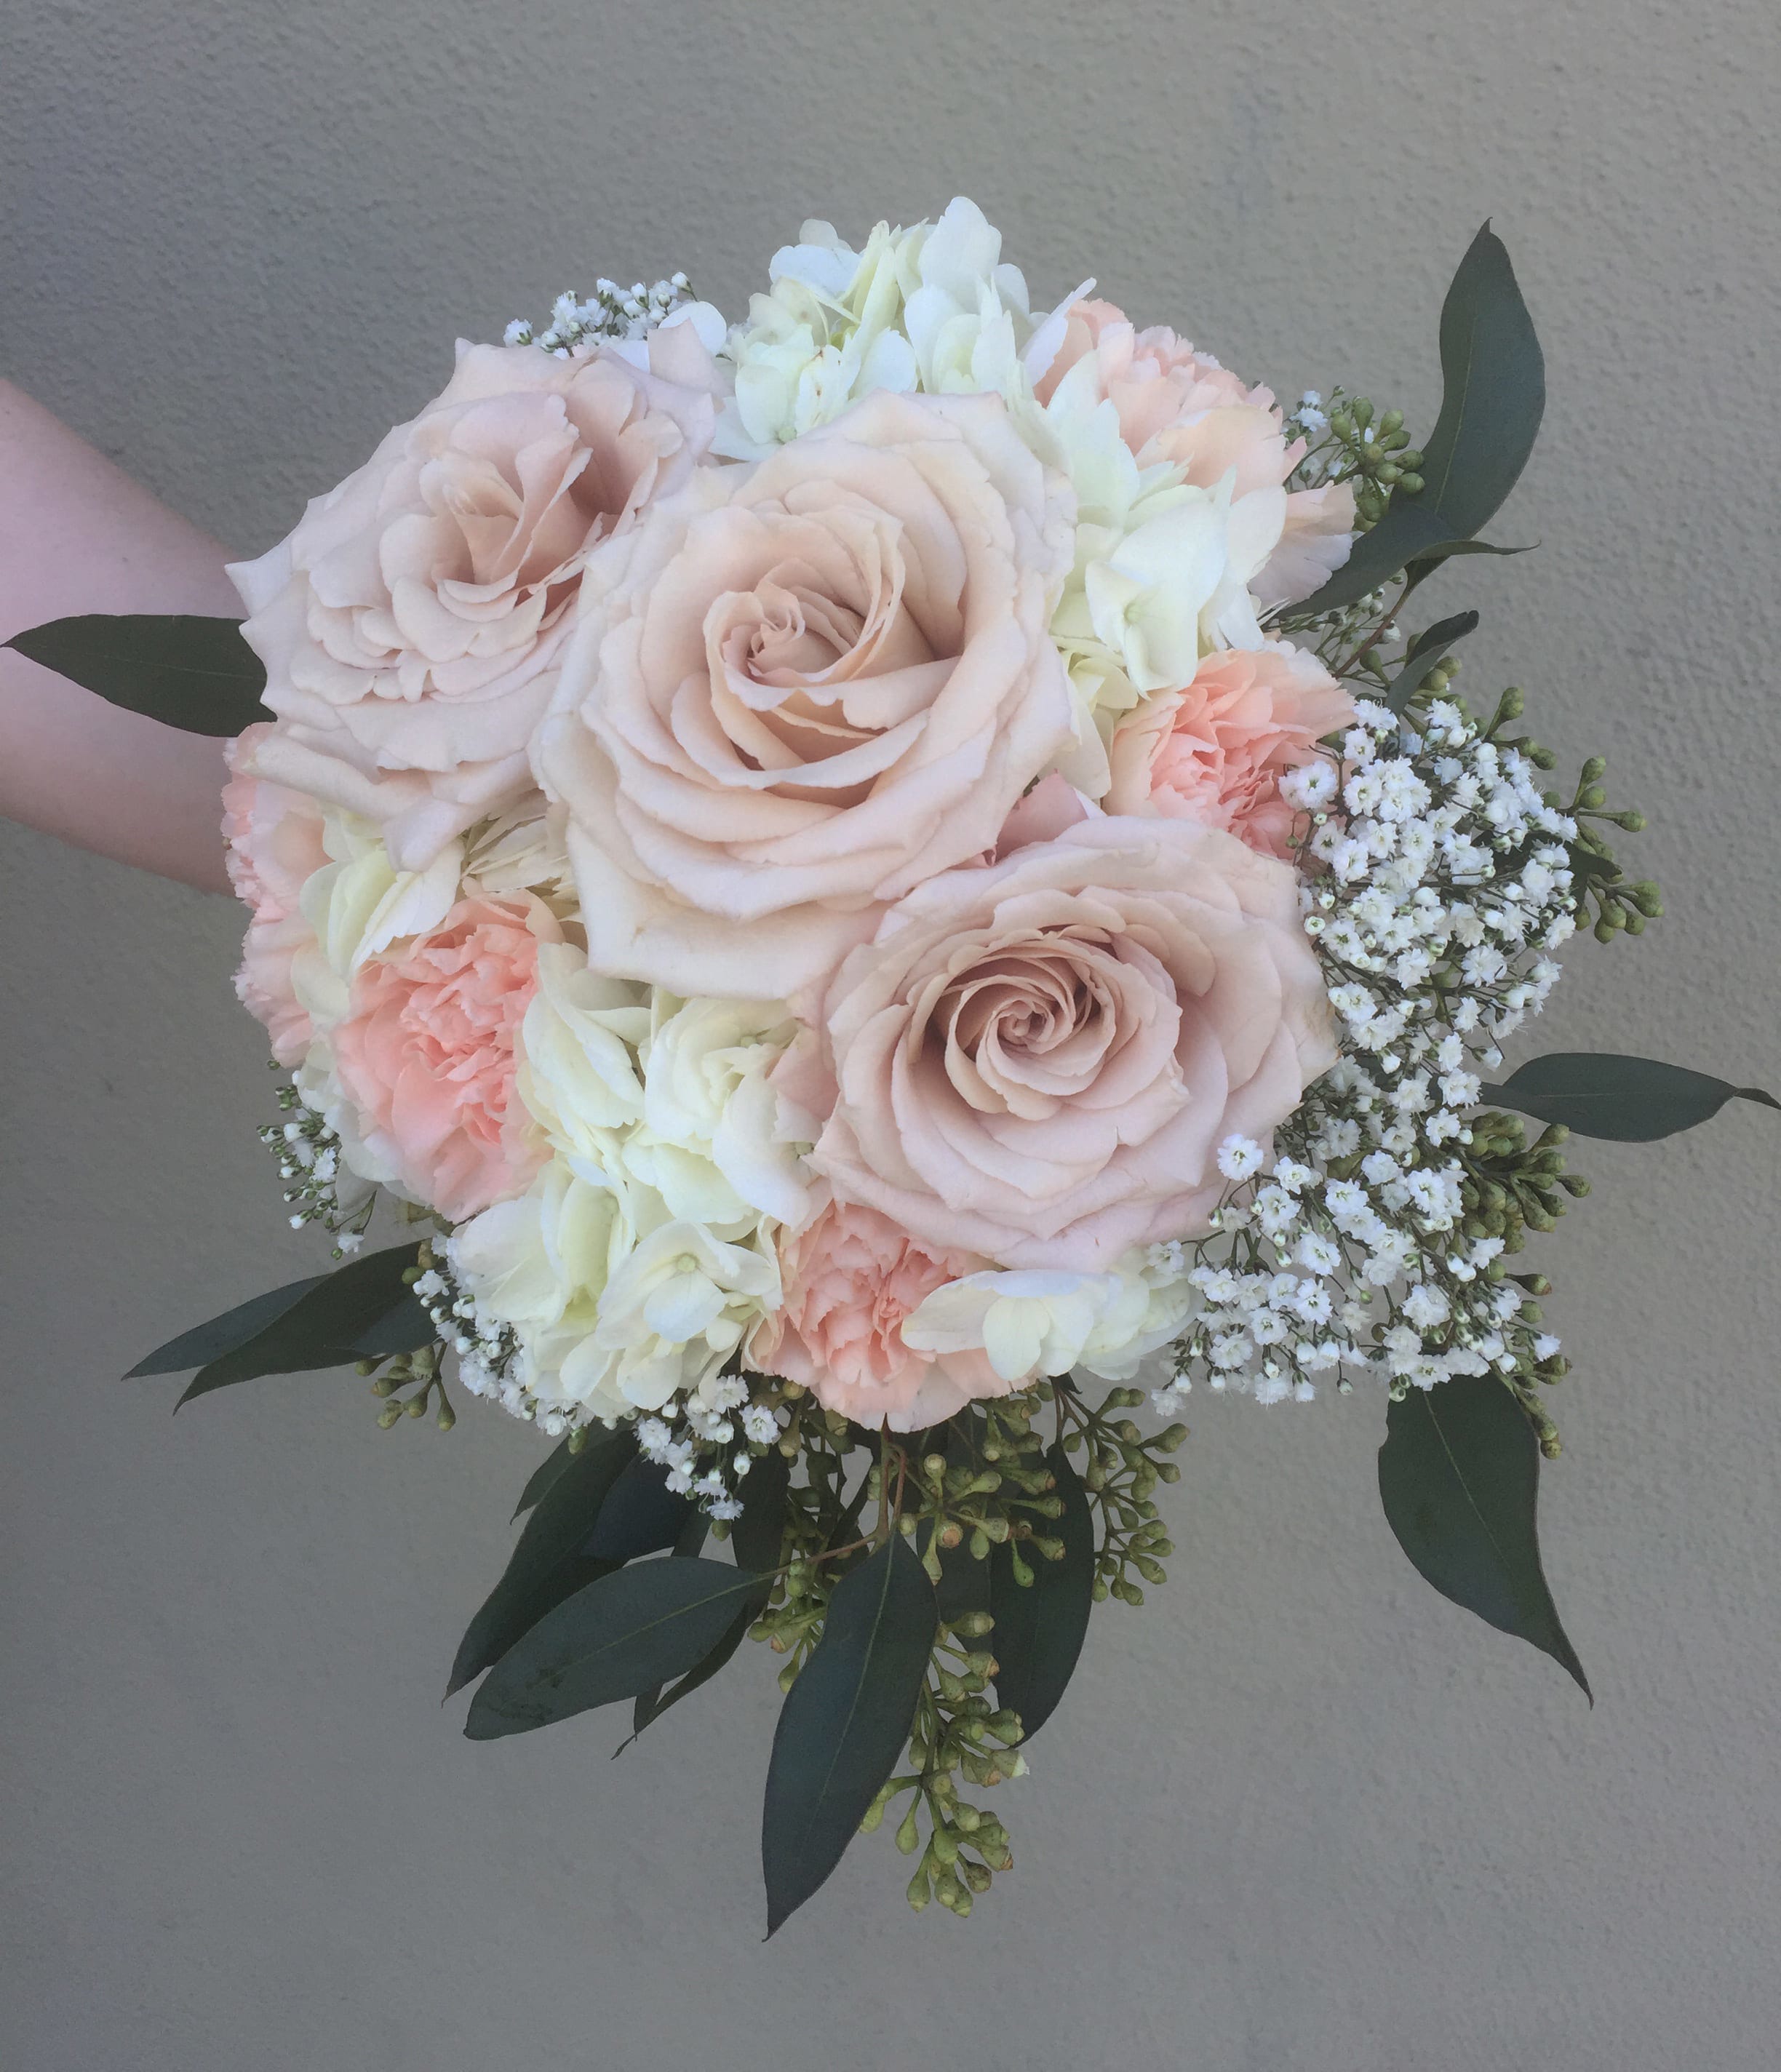 Hydrangea Roses And Carnations Bouquet In San Jose Ca Valley Florist,Tabouli Salad Recipe